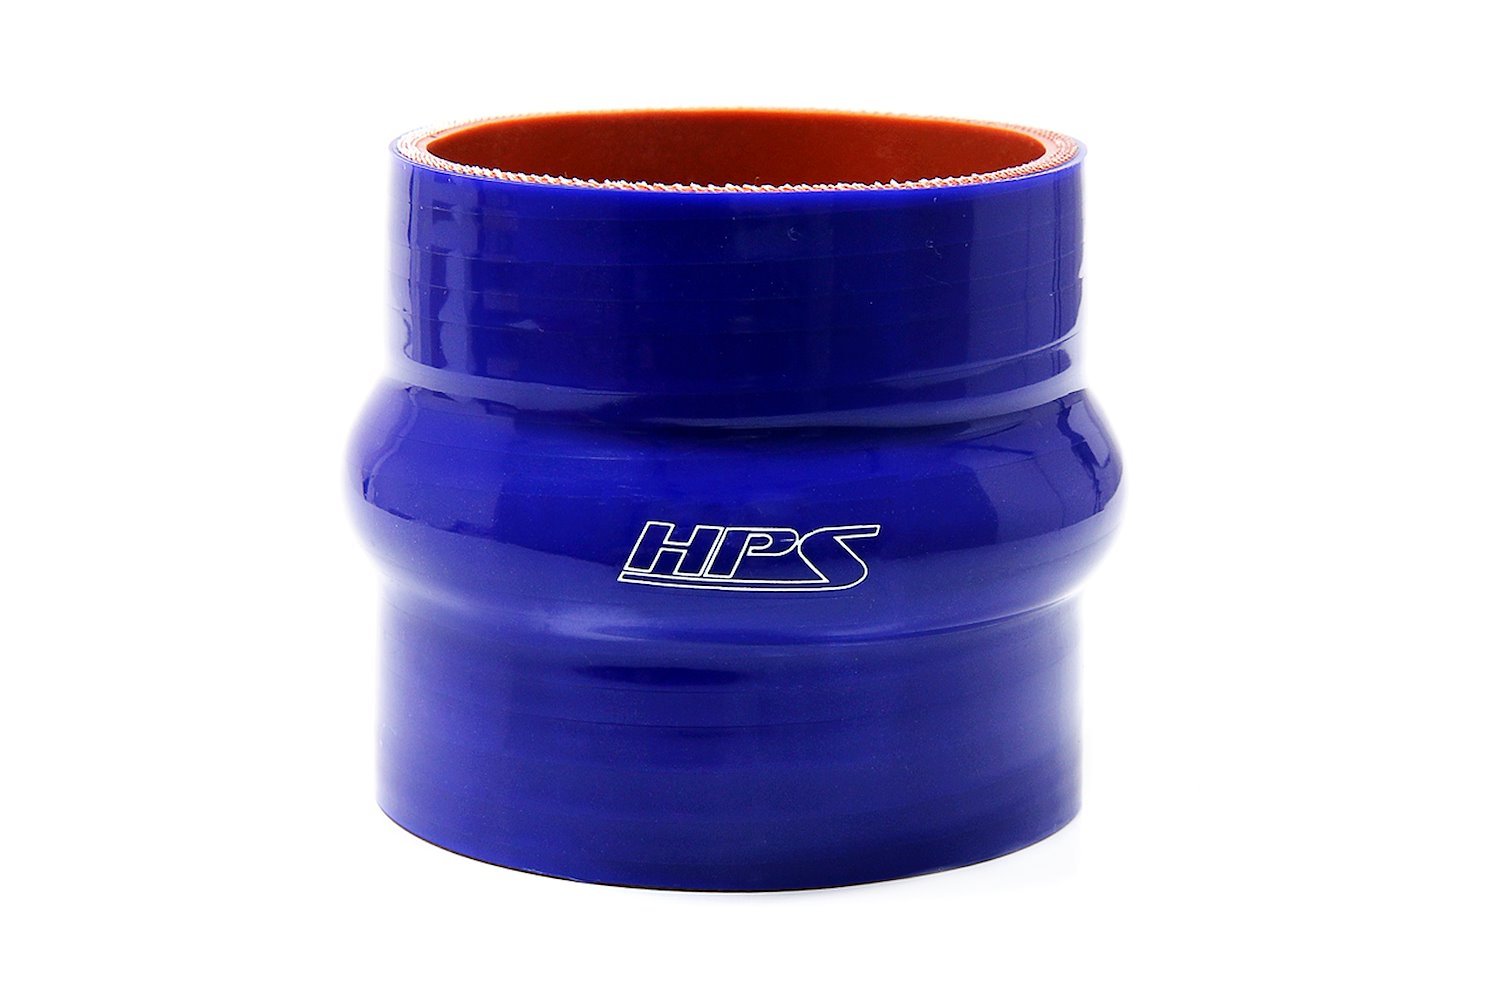 HTSHC-175-L4-BLUE Silicone Hump Coupler Hose, High-Temp 4-Ply Reinforced, 1-3/4 in. ID, 4 in. Long, Blue